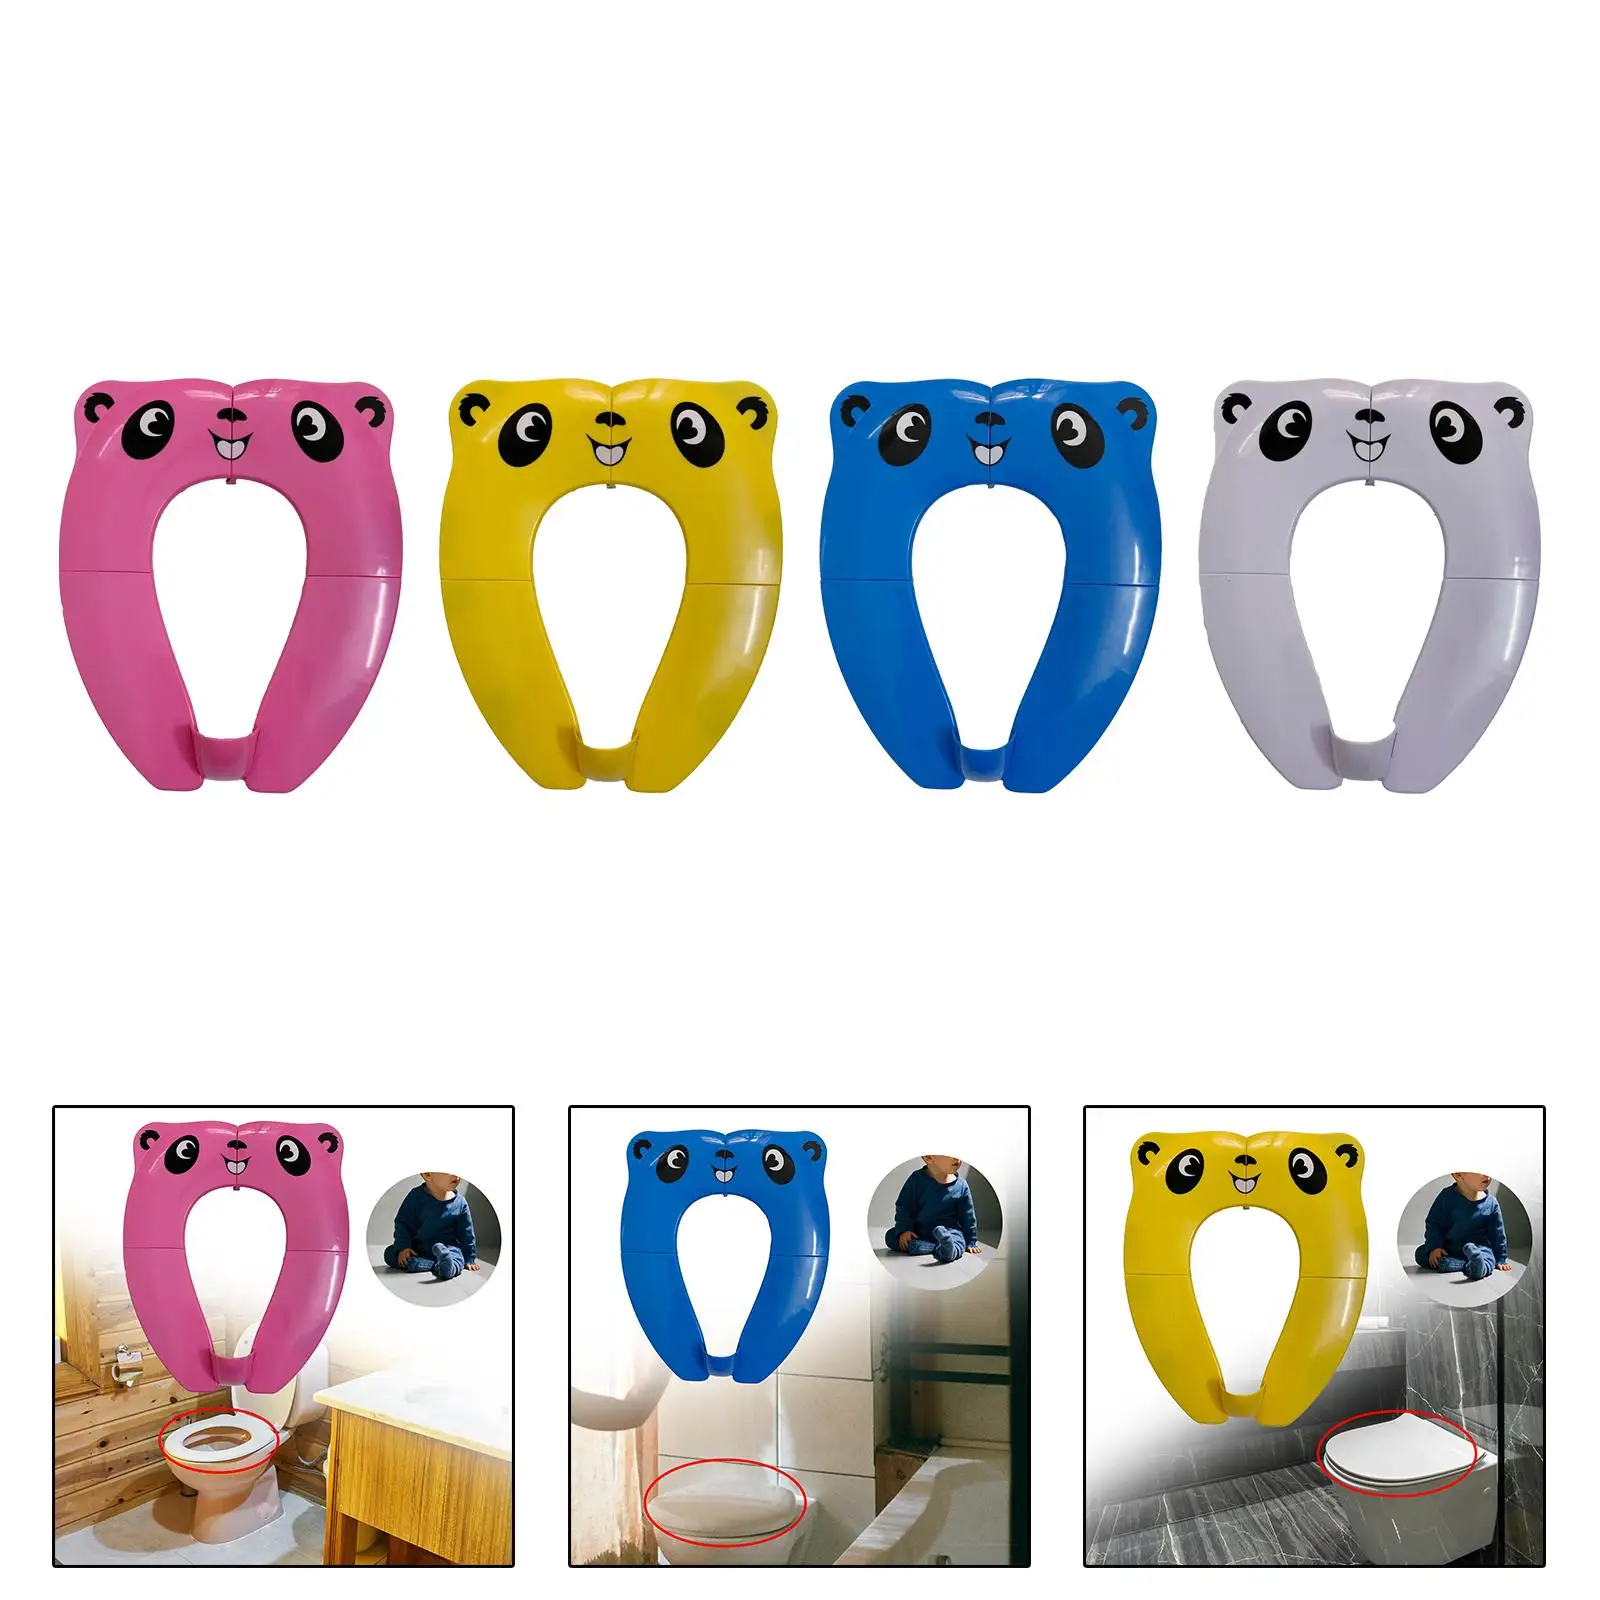 Folding Travel Potty Seat Reusable Toilet Pad Potty Toilet Seat with Splash Guard for Home Toddlers Children Kids